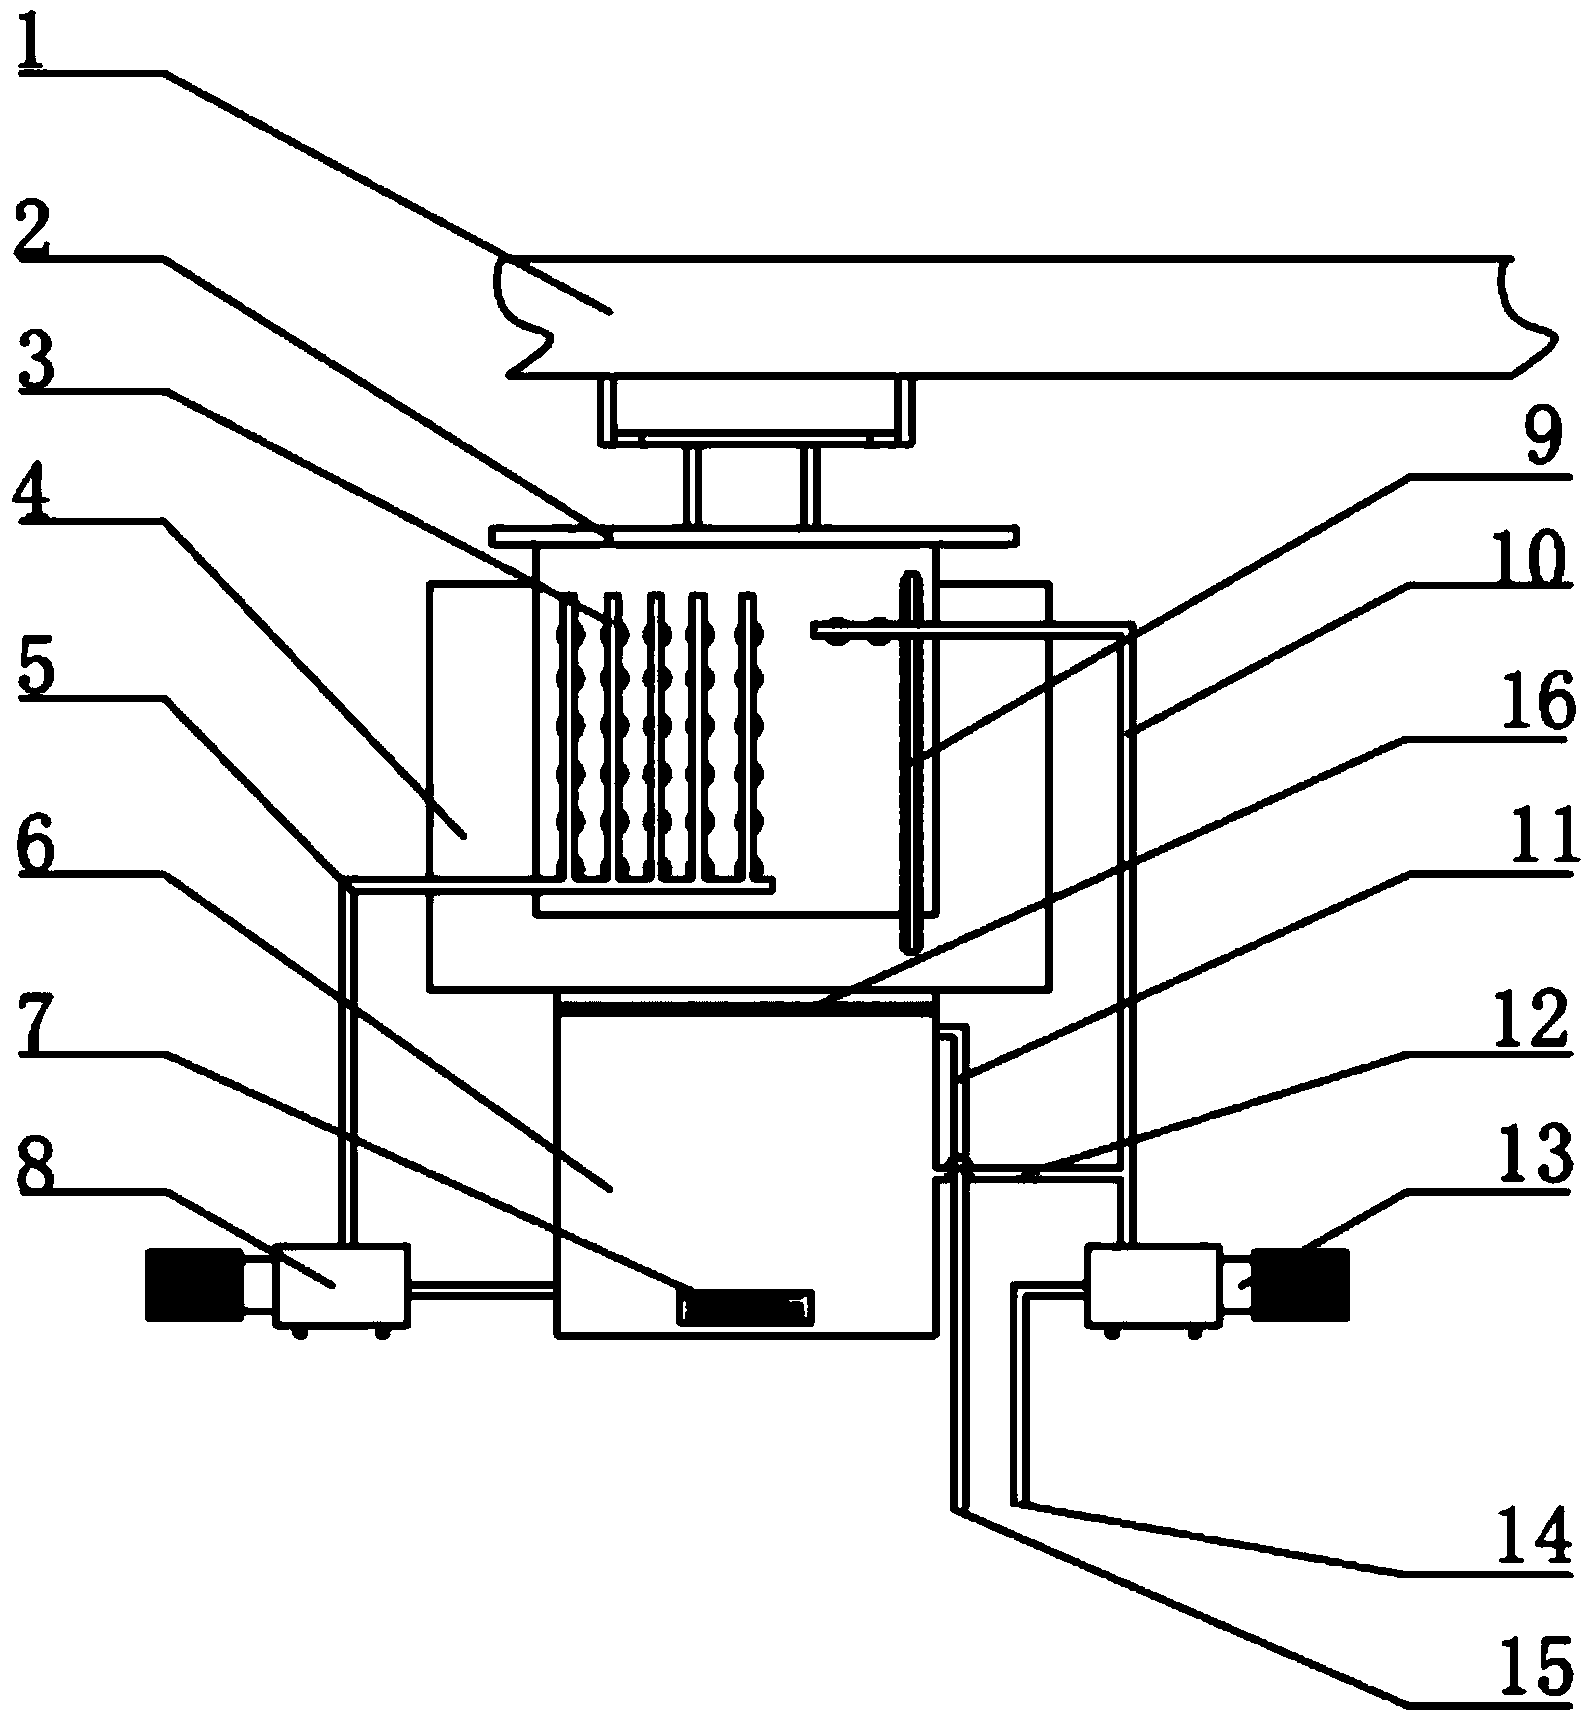 Negative polar plate needle-spraying counter-flow cleaning device in subsequent electrolysis working section of electrolytic zinc